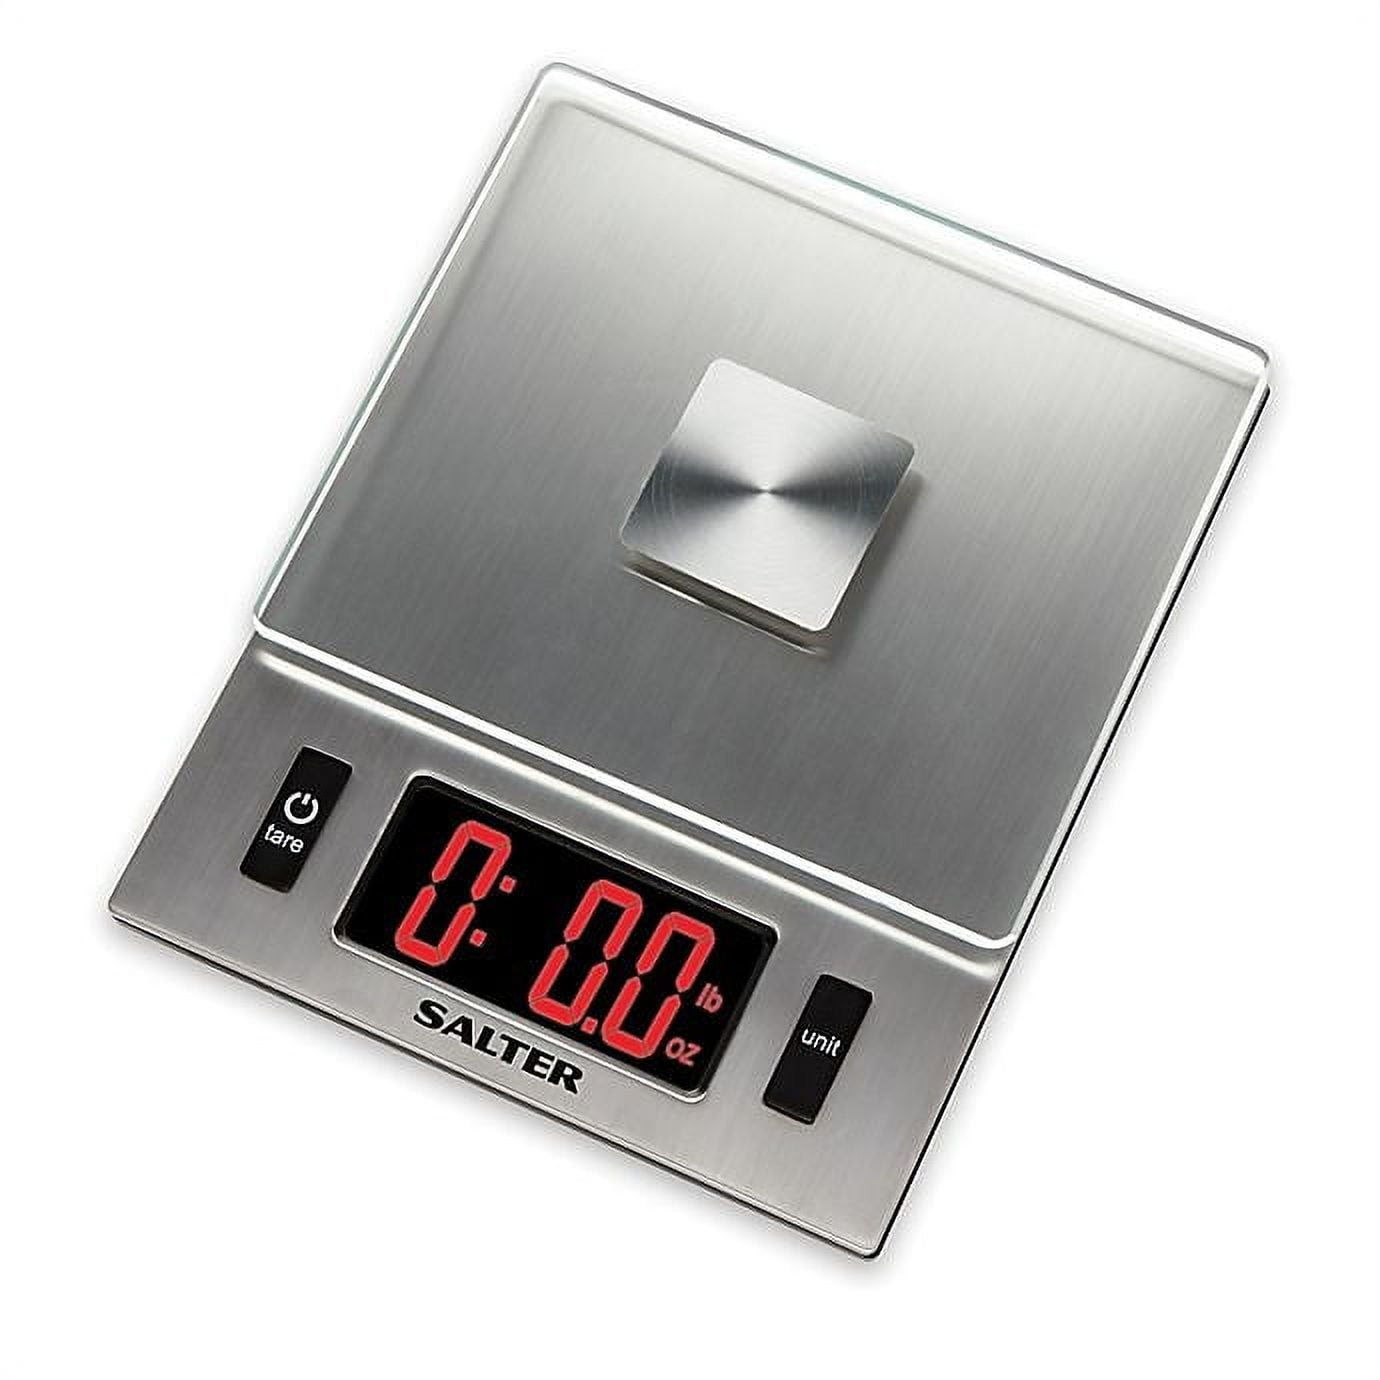 Salter Frosted Digital Kitchen Scale 10 kg, One Size